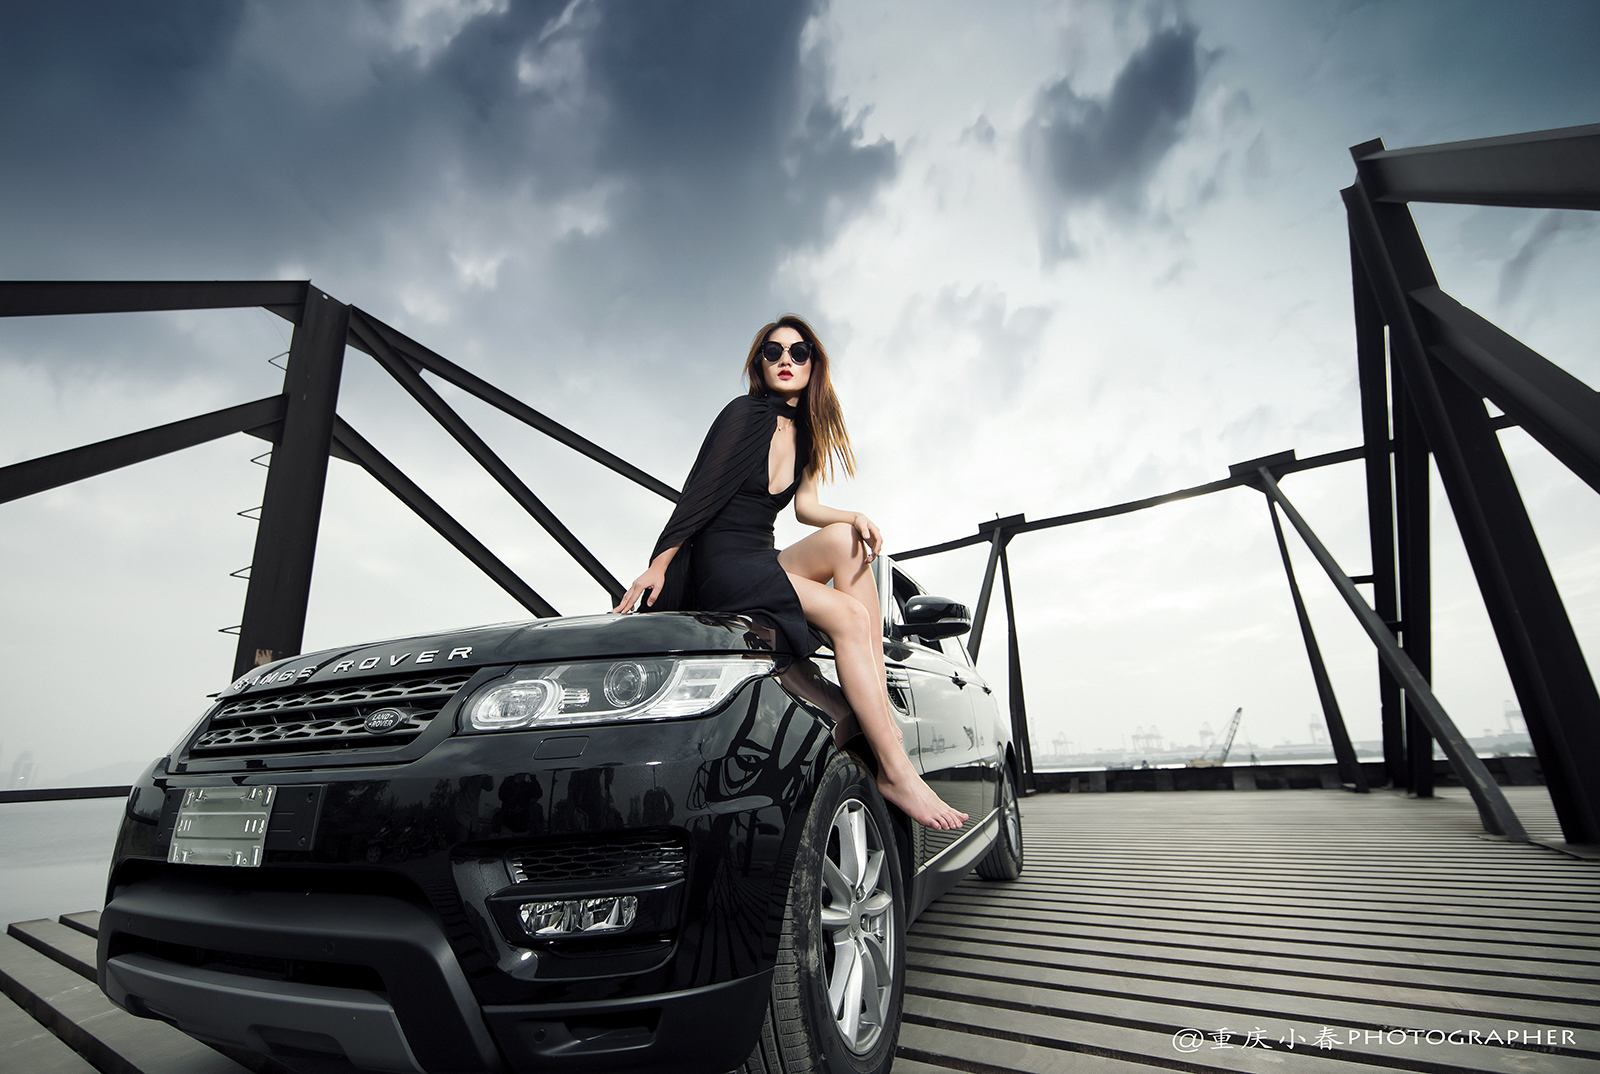 Cool car and beauty